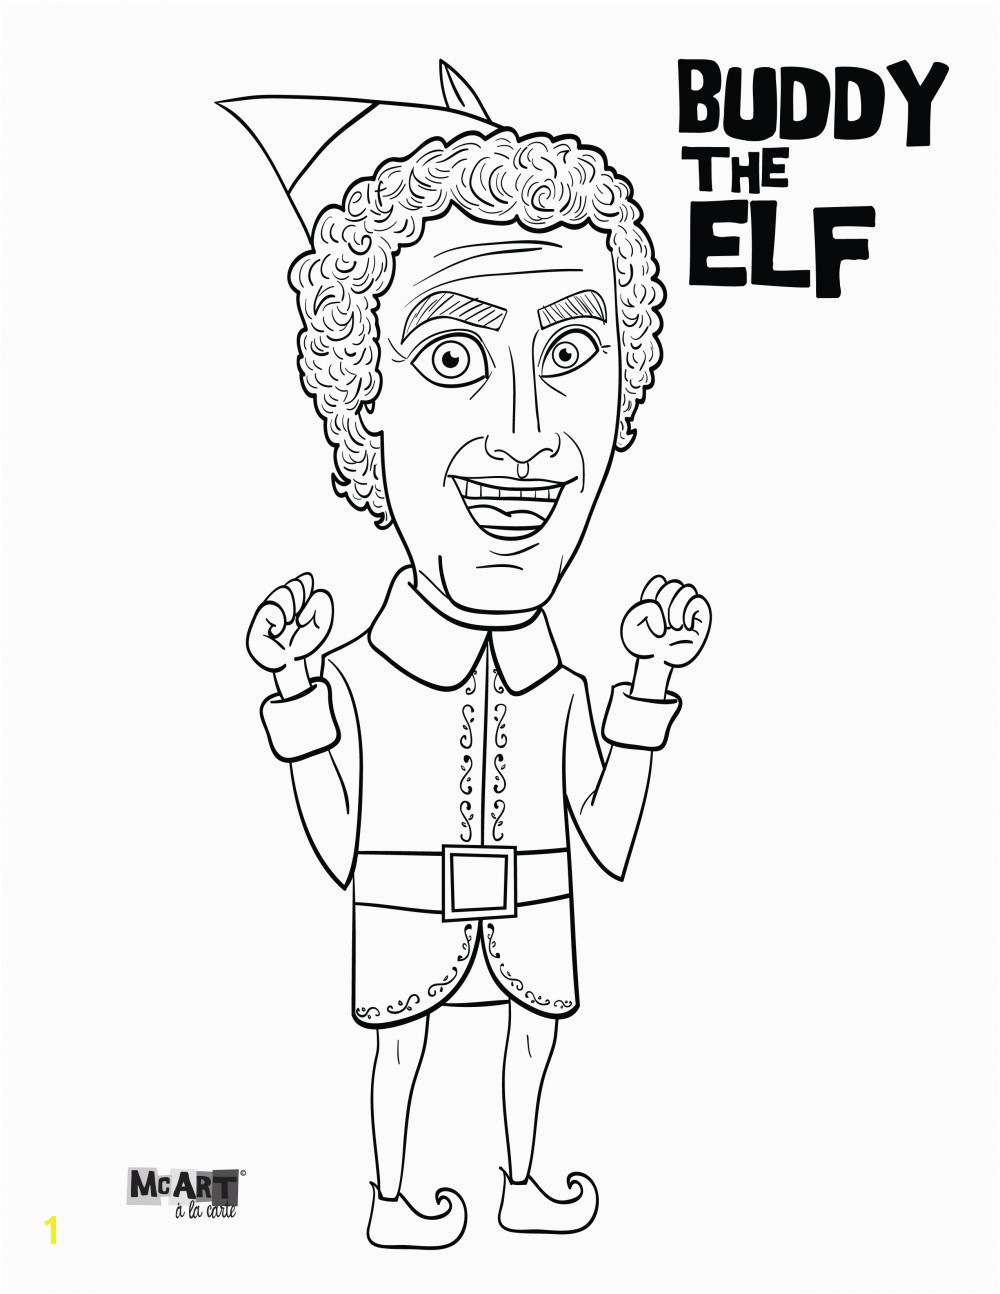 Elf Movie Coloring Pages Coloring Pages